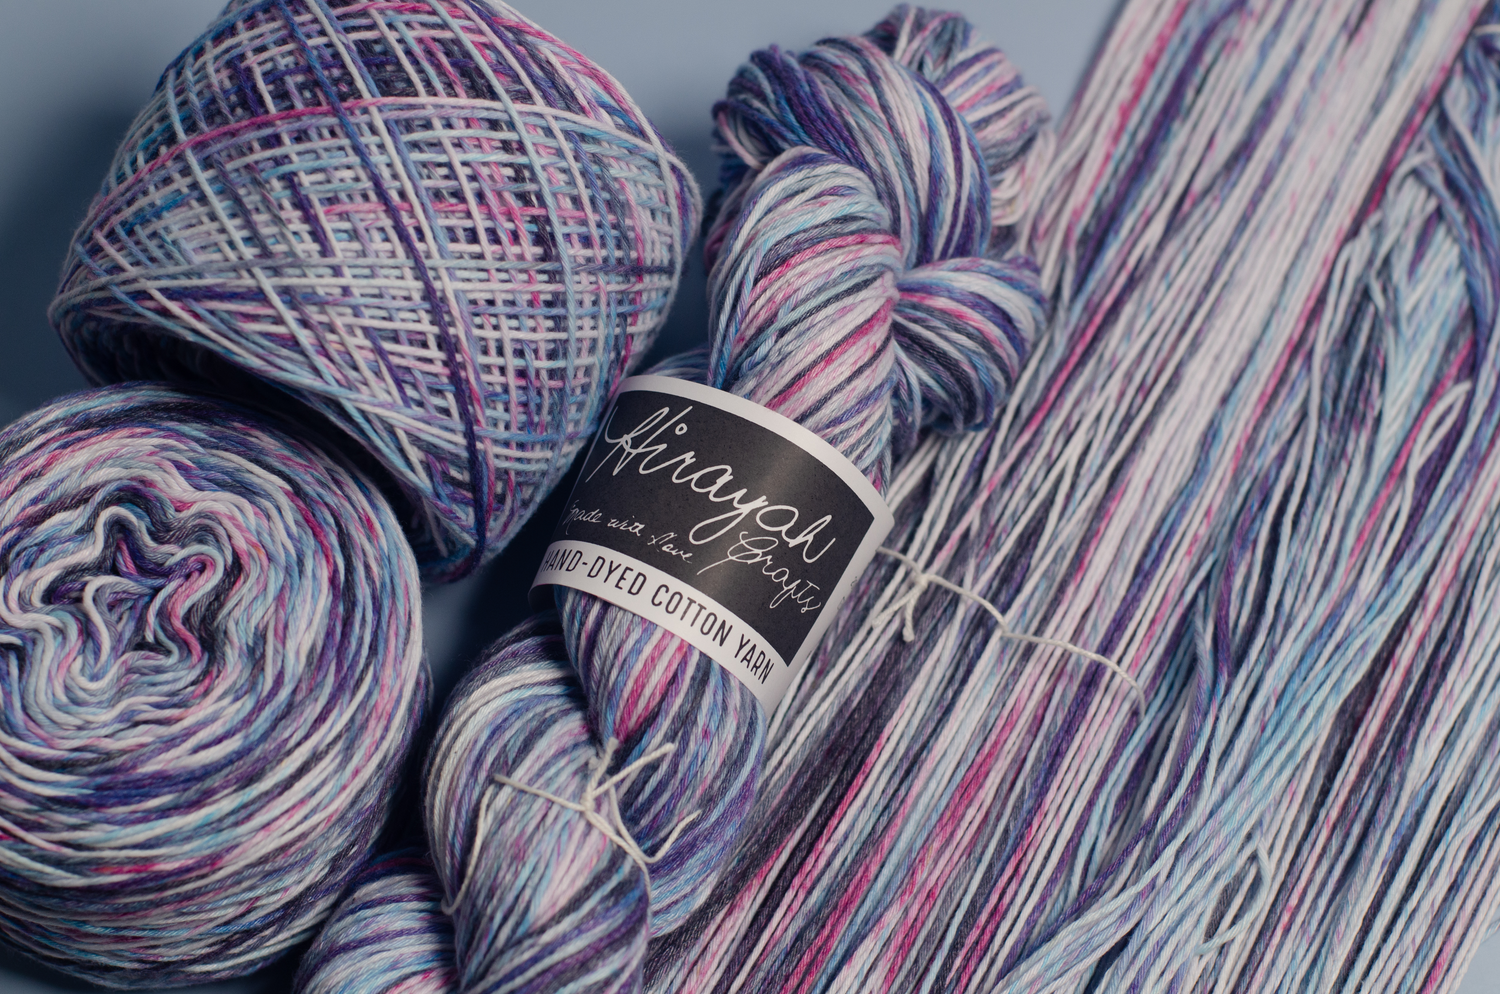 All Light worsted weight yarn